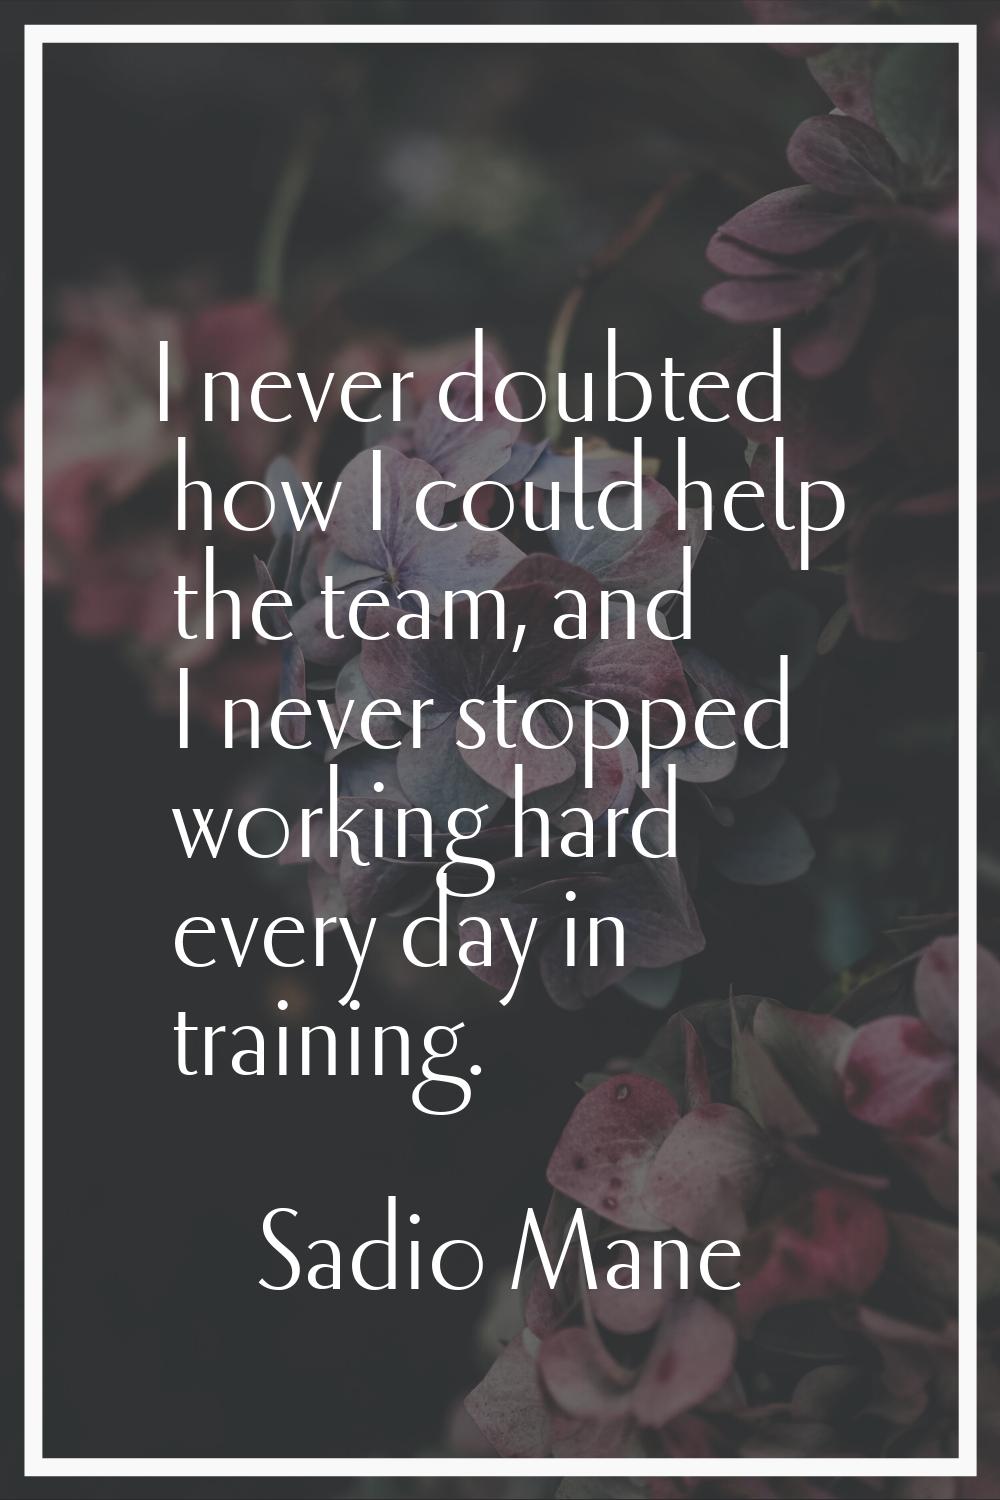 I never doubted how I could help the team, and I never stopped working hard every day in training.